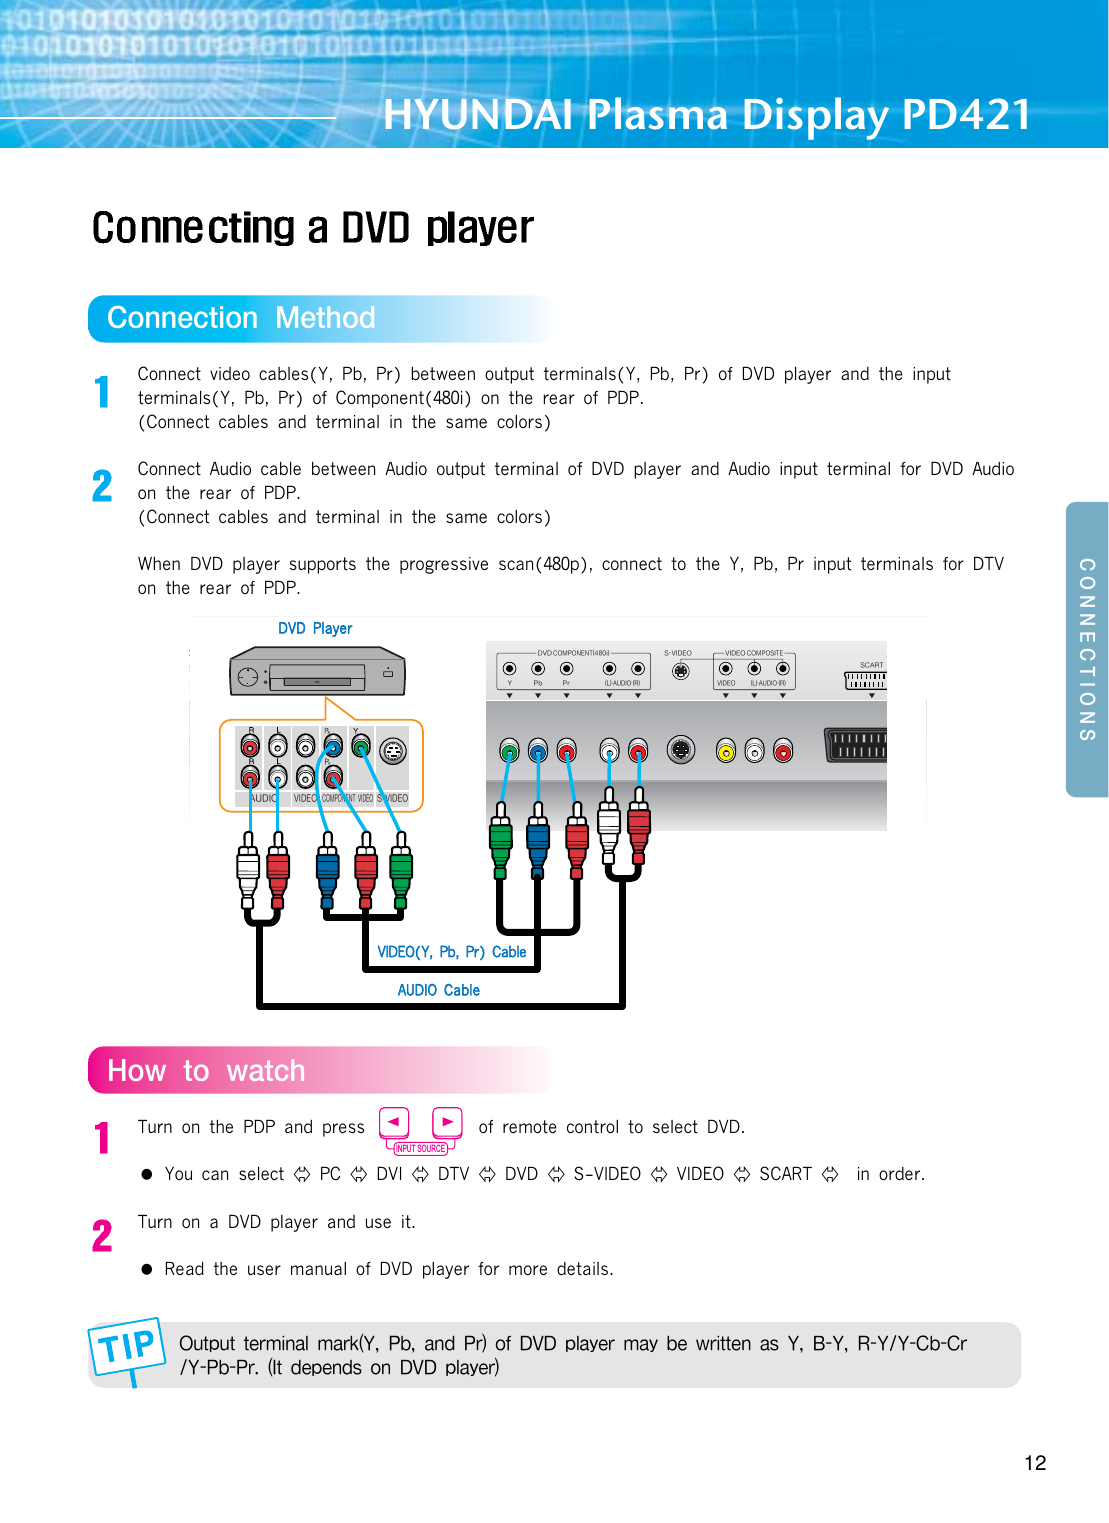 +WVVMK\QWV5M\PWLConnect video cables(Y, Pb, Pr) between output terminals(Y, Pb, Pr) of DVD player and the input     terminals(Y, Pb, Pr) of Component(480i) on the rear of PDP. (Connect cables and terminal in the same colors)  Connect Audio cable between Audio output terminal of DVD player and Audio input terminal for DVD Audioon the rear of PDP. (Connect cables and terminal in the same colors) When DVD player supports the progressive scan(480p), connect to the Y, Pb, Pr input terminals for DTVon the rear of PDP. 0W_\W_I\KPTurn on the PDP and press             of remote control to select DVD.  ●You can select  PC  DVI  DTV  DVD  S-VIDEO  VIDEO  SCART  in order. Turn on a DVD player and use it. ●Read the user manual of DVD player for more details.7]\X]\\MZUQVITUIZSA8JIVL8ZWN,&gt;,XTIaMZUIaJM_ZQ\\MVI[A*A:AA+J+ZA8J8Z1\LMXMVL[WV,&gt;,XTIaMZHYUNDAI Plasma Display PD42112+766-+&lt;176;,&lt;&gt;ၮഎ XX Q ,&lt;&gt;ᇰዅ஡ቼၮഎ XX Q,;=*ၮഎၗໜဨA8J8ZႺၗໜဨ8JA8Z,&gt;,+75876-6&lt; Q &gt;1,-7+7587;1&lt;-;&gt;1,-74)=,17: &gt;1,-7 4)=,17:;+):&lt;)=,17&gt;1,-7 ;&gt;1,-7+75876-6&lt;&gt;1,-7DDVVDD  PPllaayyeerrAAUUDDIIOOCCaabblleeINPUT SOURCESOURCEMODEPIP ON/OFFSWAPSIZEPOSITIONVVIIDDEEOO((YY,,  PPbb,,  PPrr))  CCaabbllee